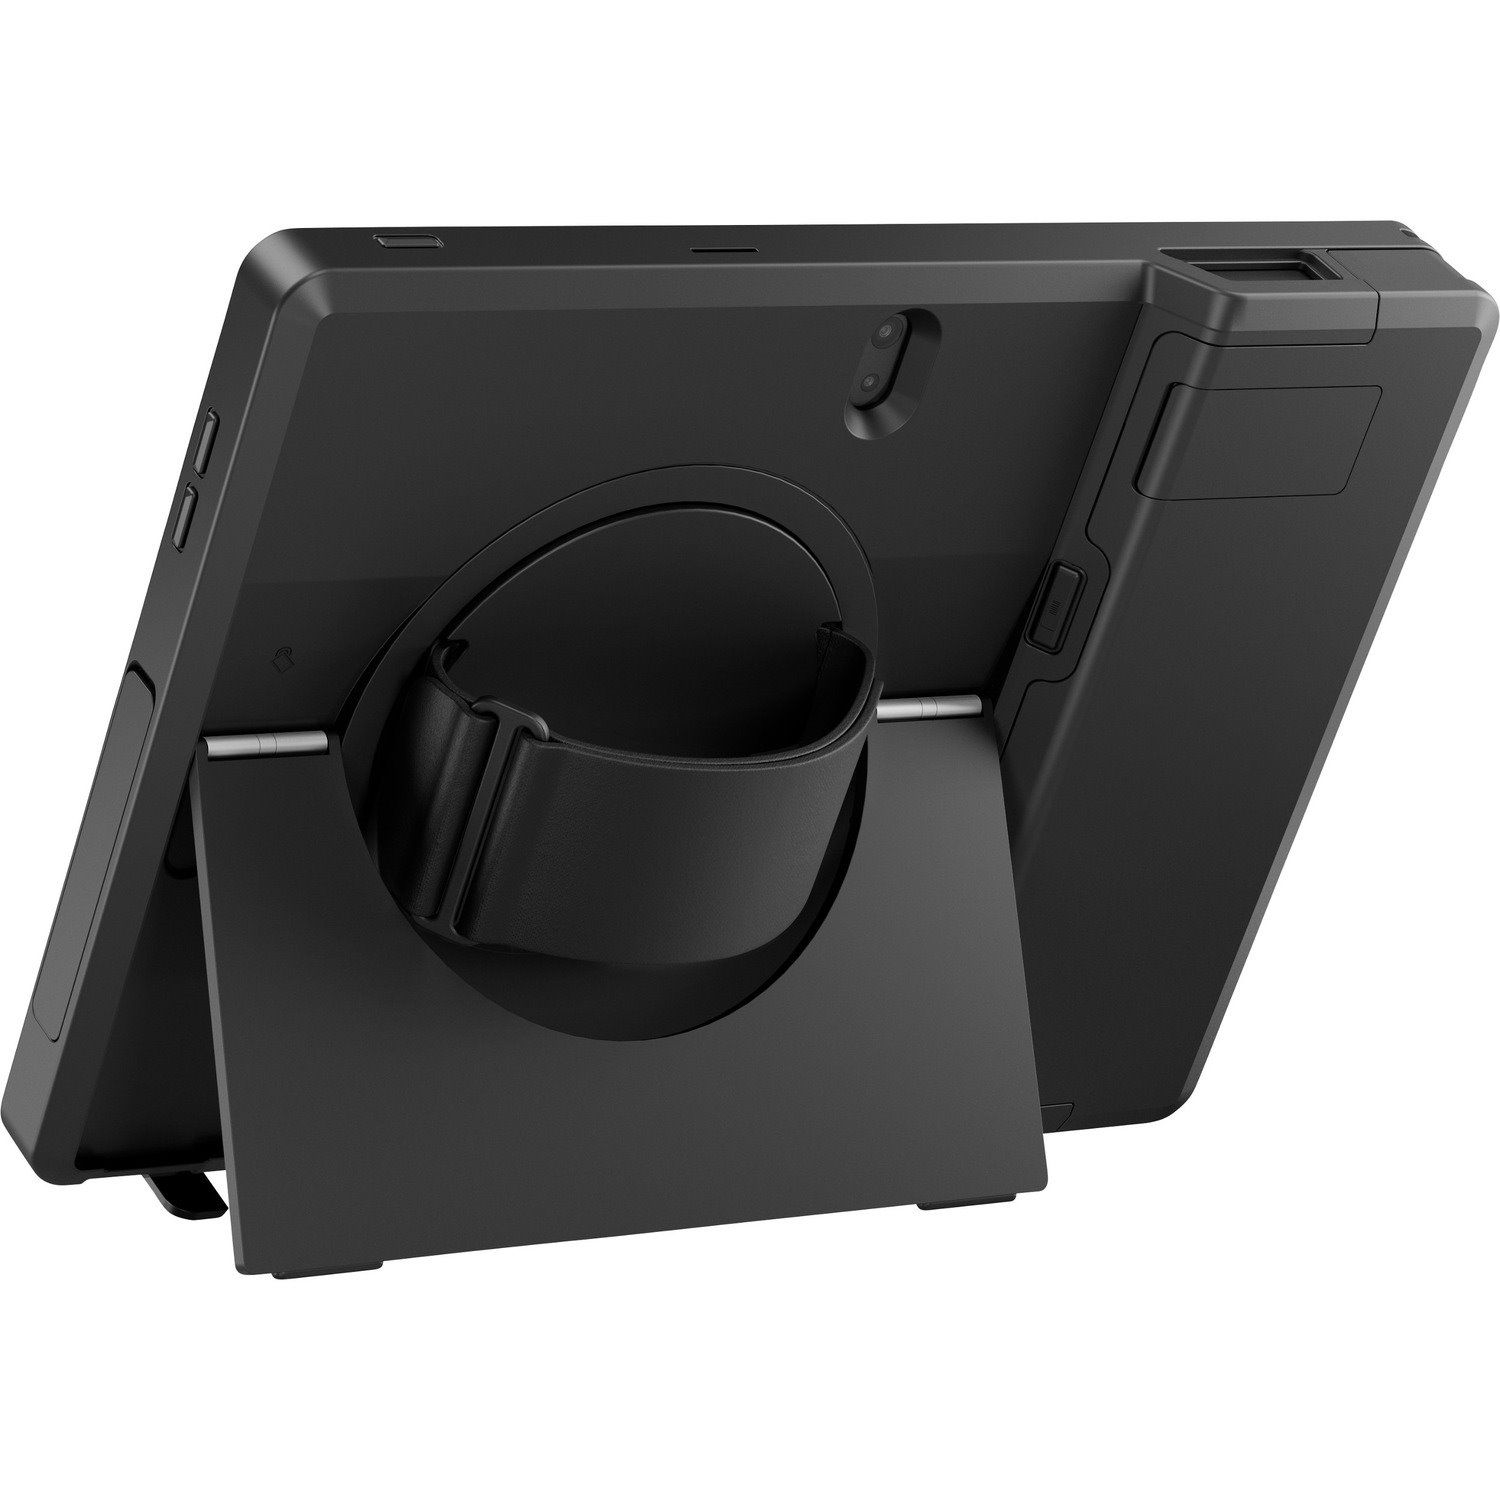 HP Case for HP Engage Go Tablet